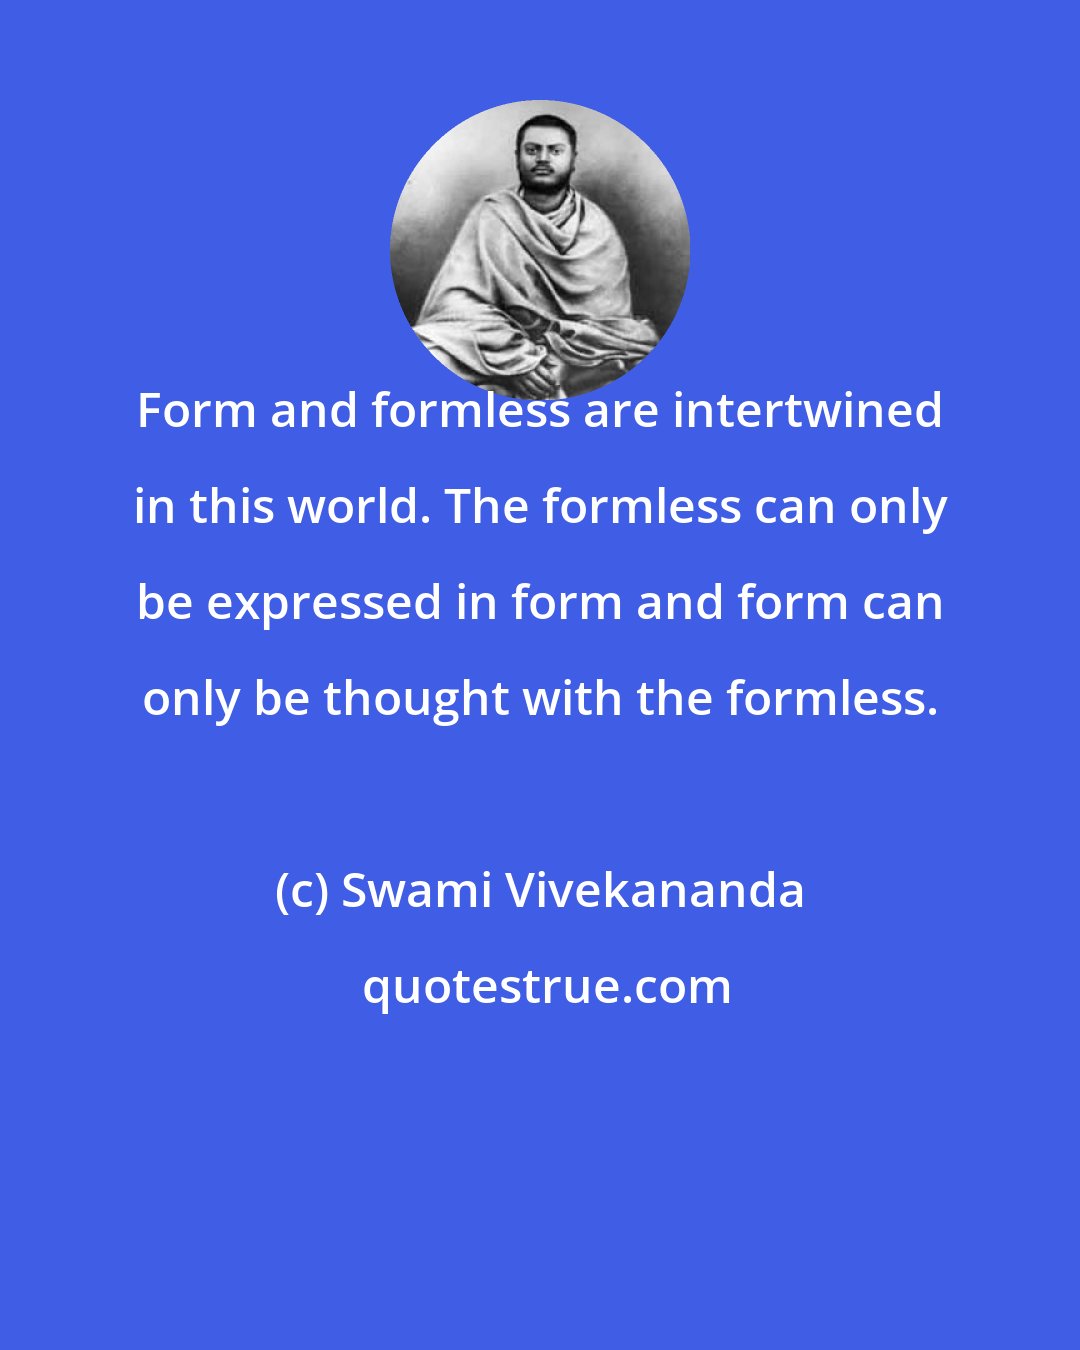 Swami Vivekananda: Form and formless are intertwined in this world. The formless can only be expressed in form and form can only be thought with the formless.